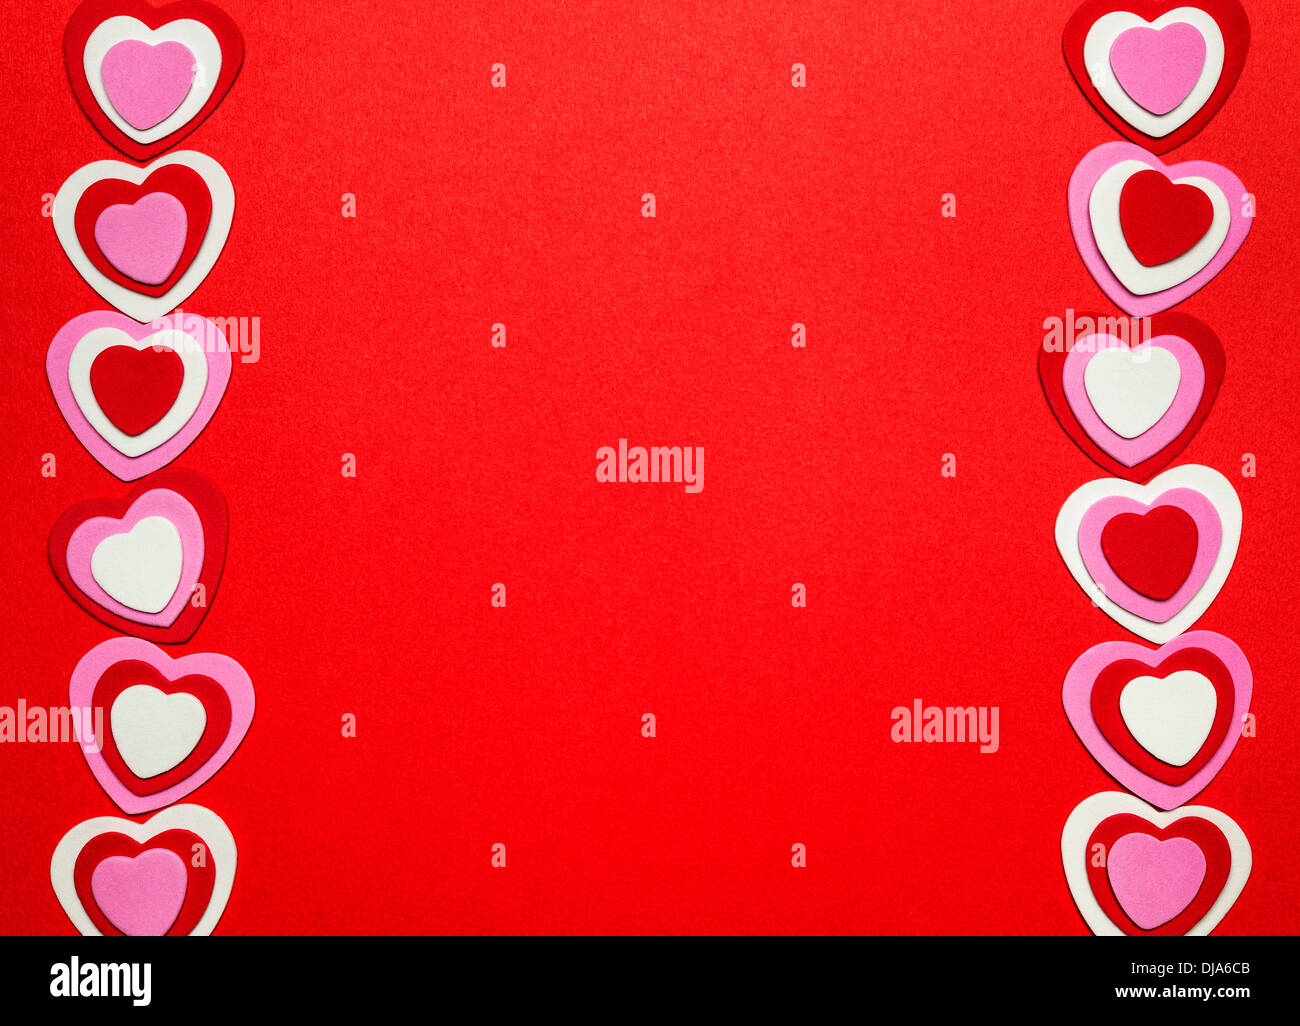 Border Of Romantic Red Pink And White Hearts For Valentines Day On